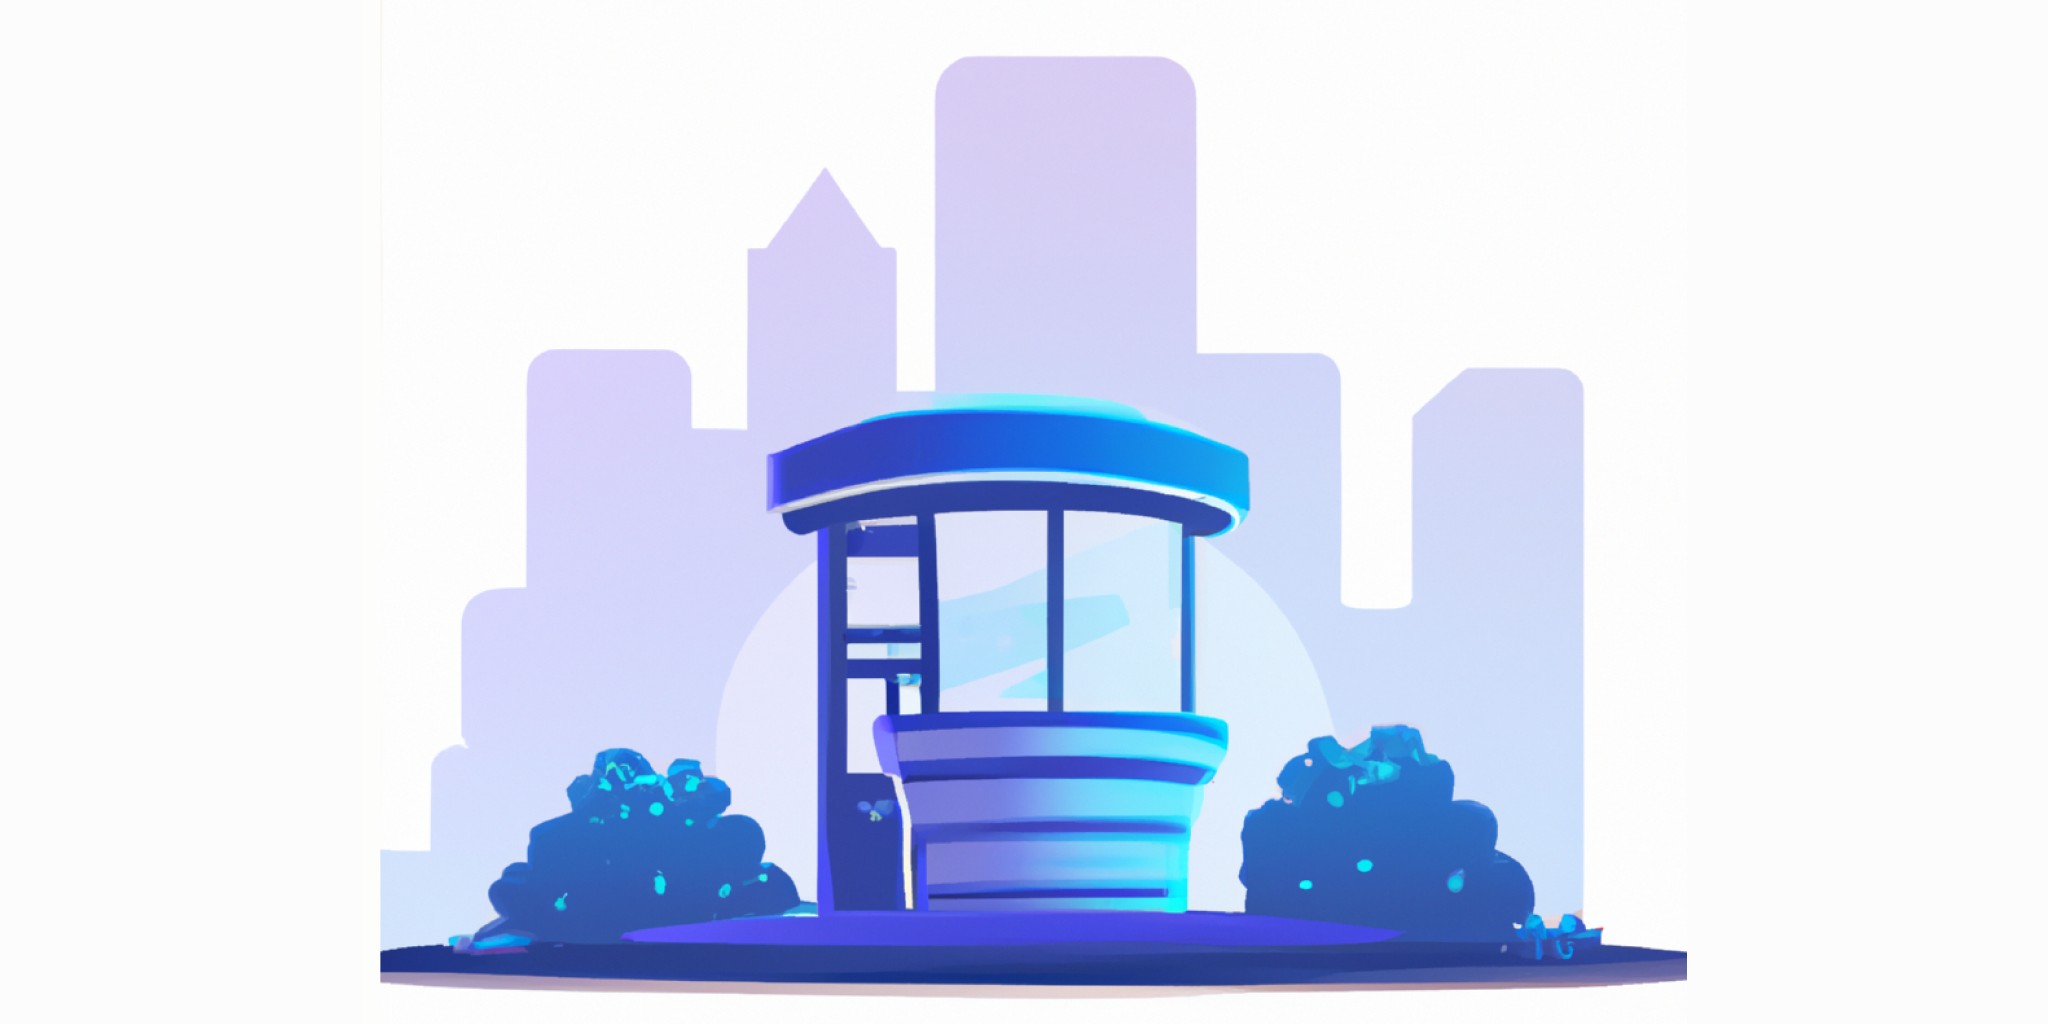 a skyscraper and a kiosk in flat illustration style with gradients and white background